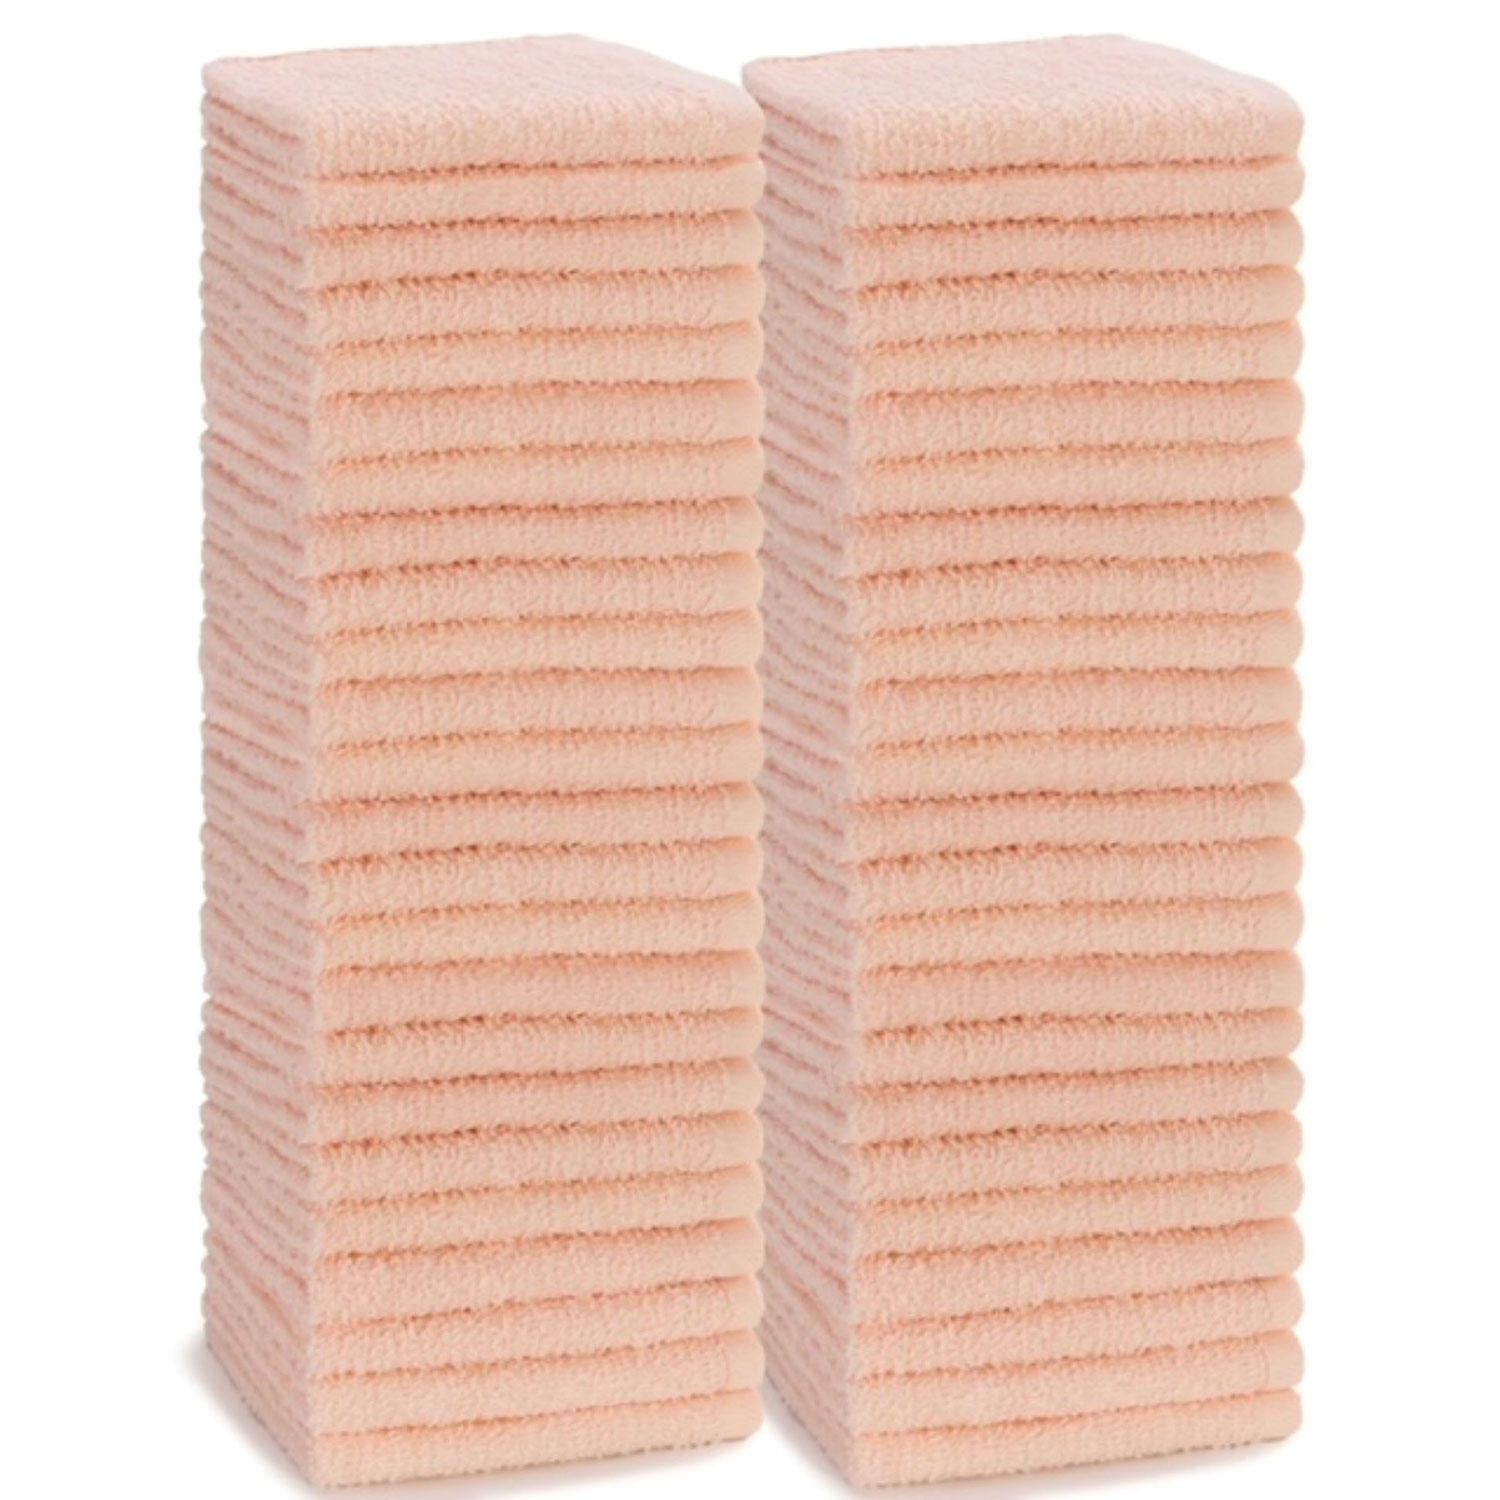 Hometex Lightweight Terry Cleaning Wash Cloths (48pk, Rose), Size 12" x 12"